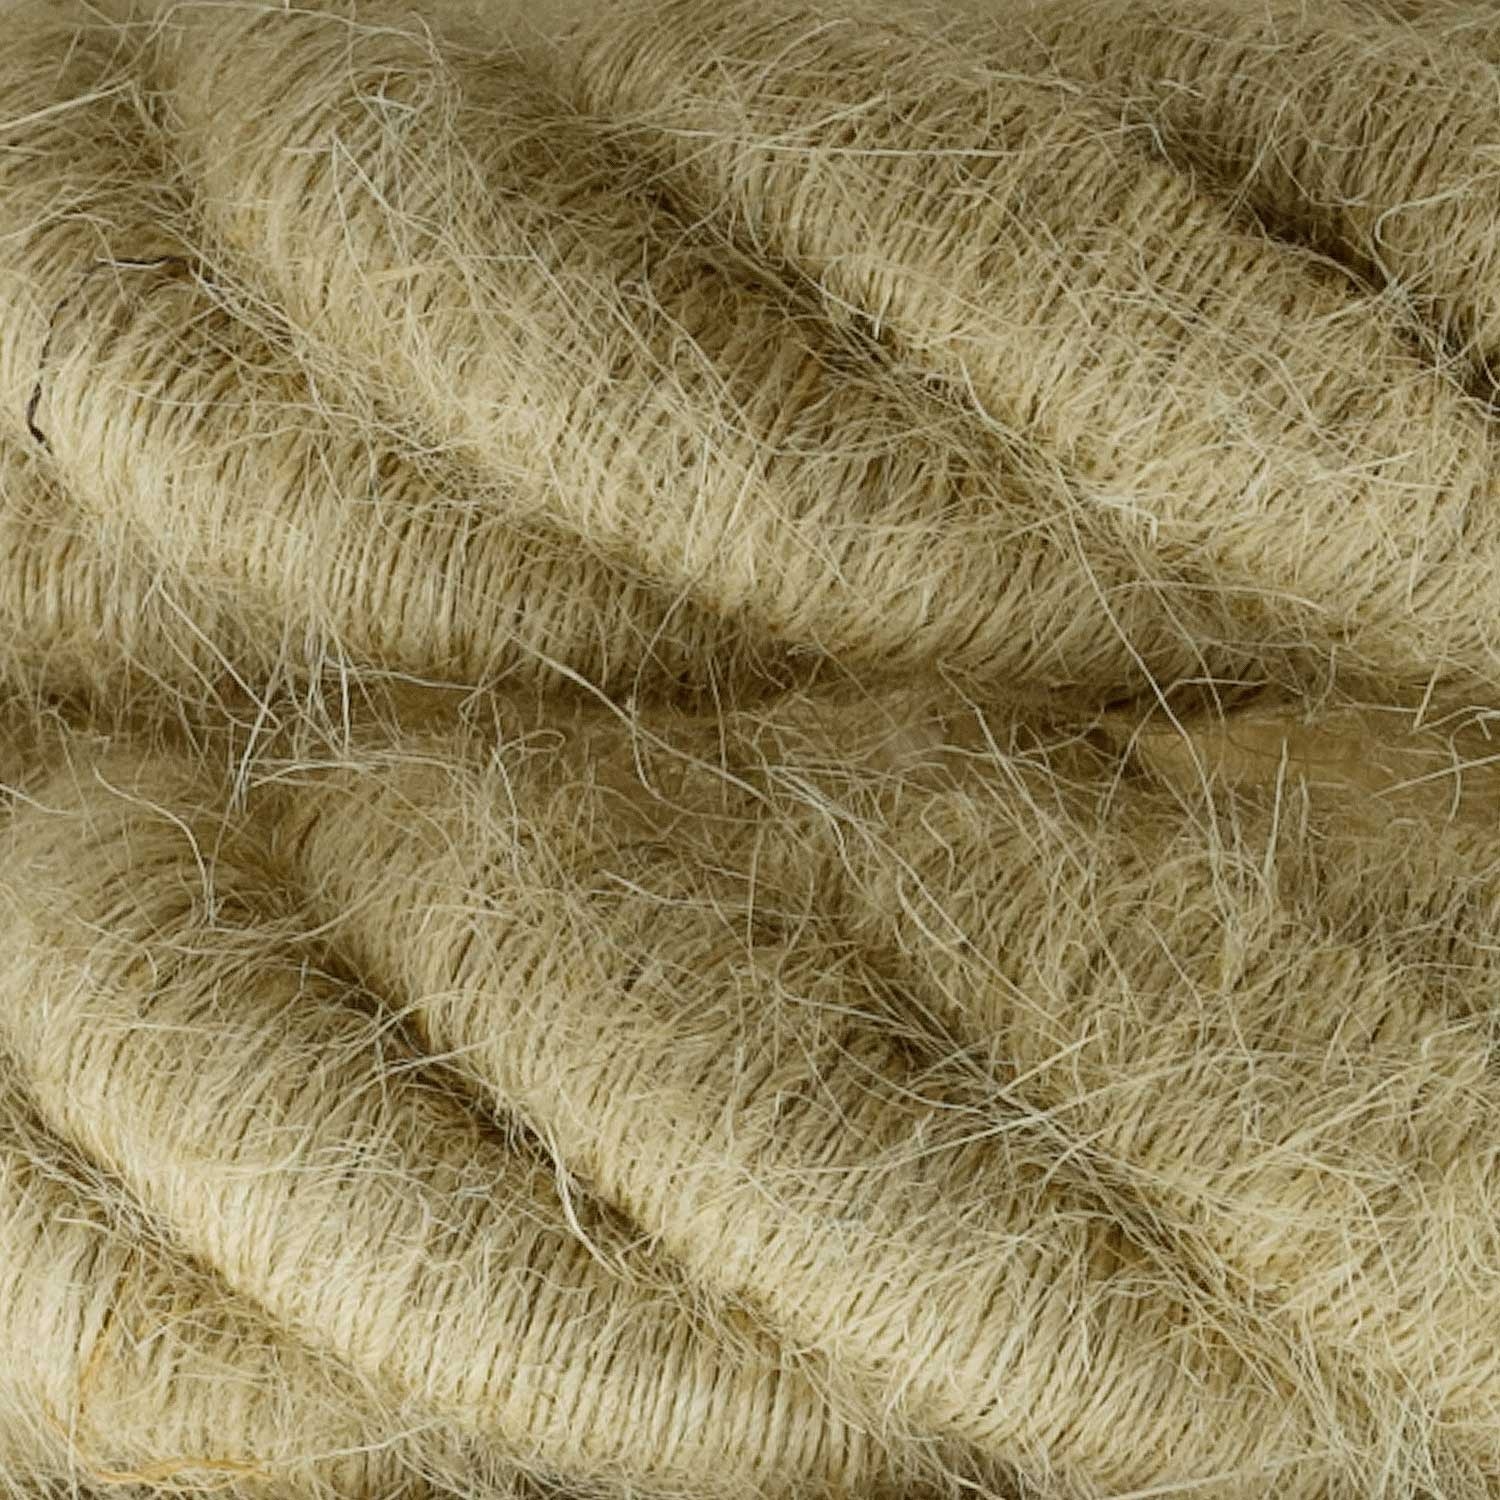 3XL Rope electrical wire 18/3 AWG wire inside. Rough Jute Fabric. 30mm.